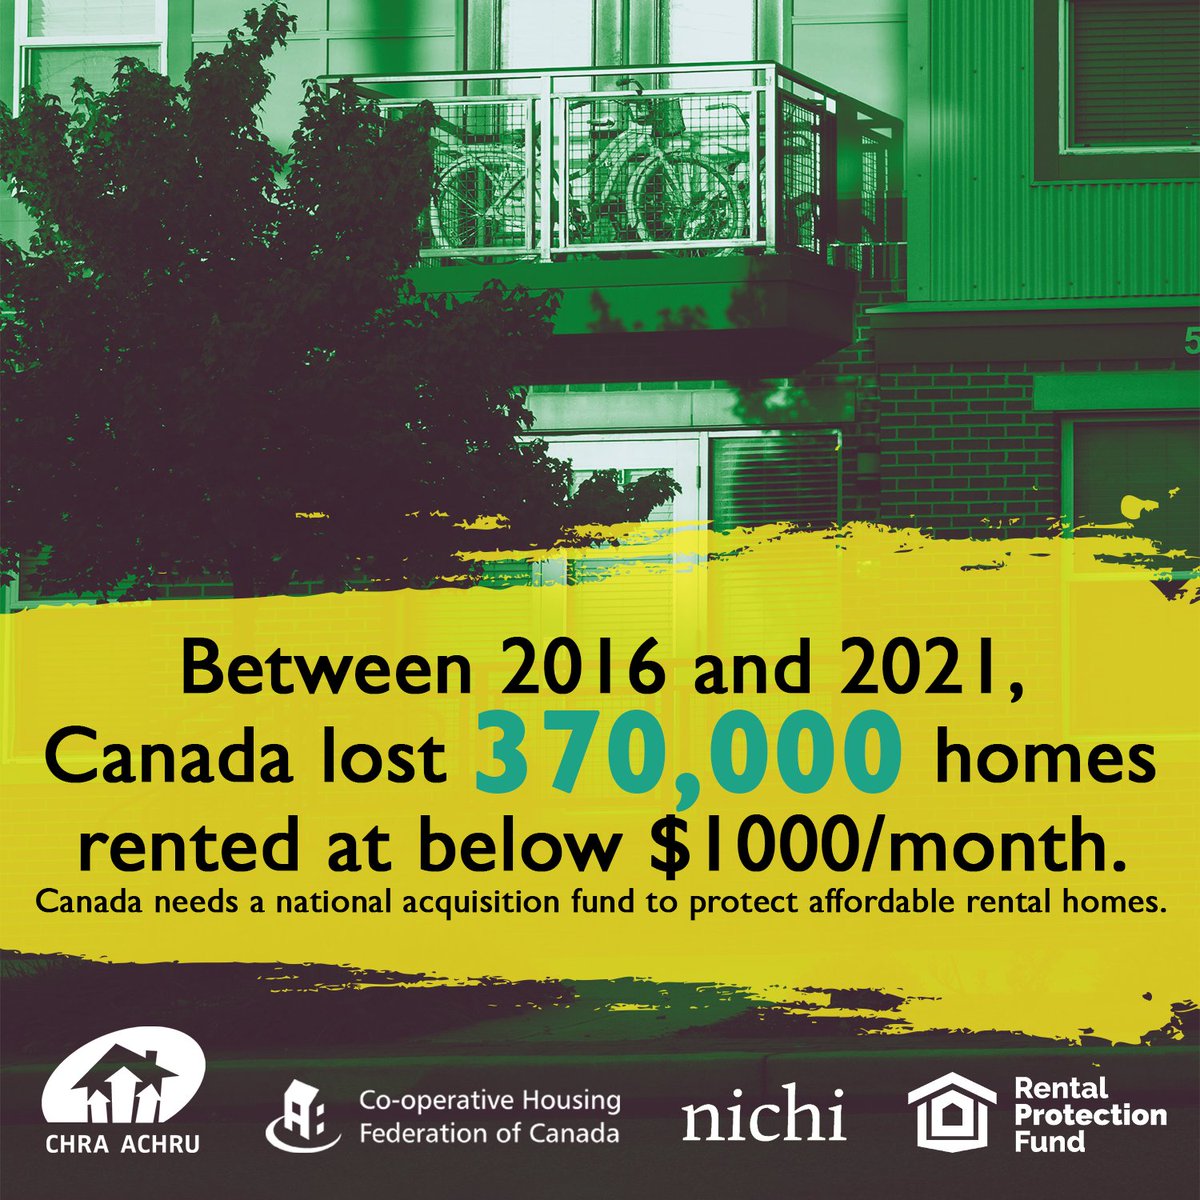 Check out the proposal for a national acquisition fund to move rental homes into community ownership through non-profits and co-ops. This would maintain housing stock and protect affordability for the future!   @CHRA_ACHRU @NICHI_housing @CHFCanada 
acquisitionfund.ca